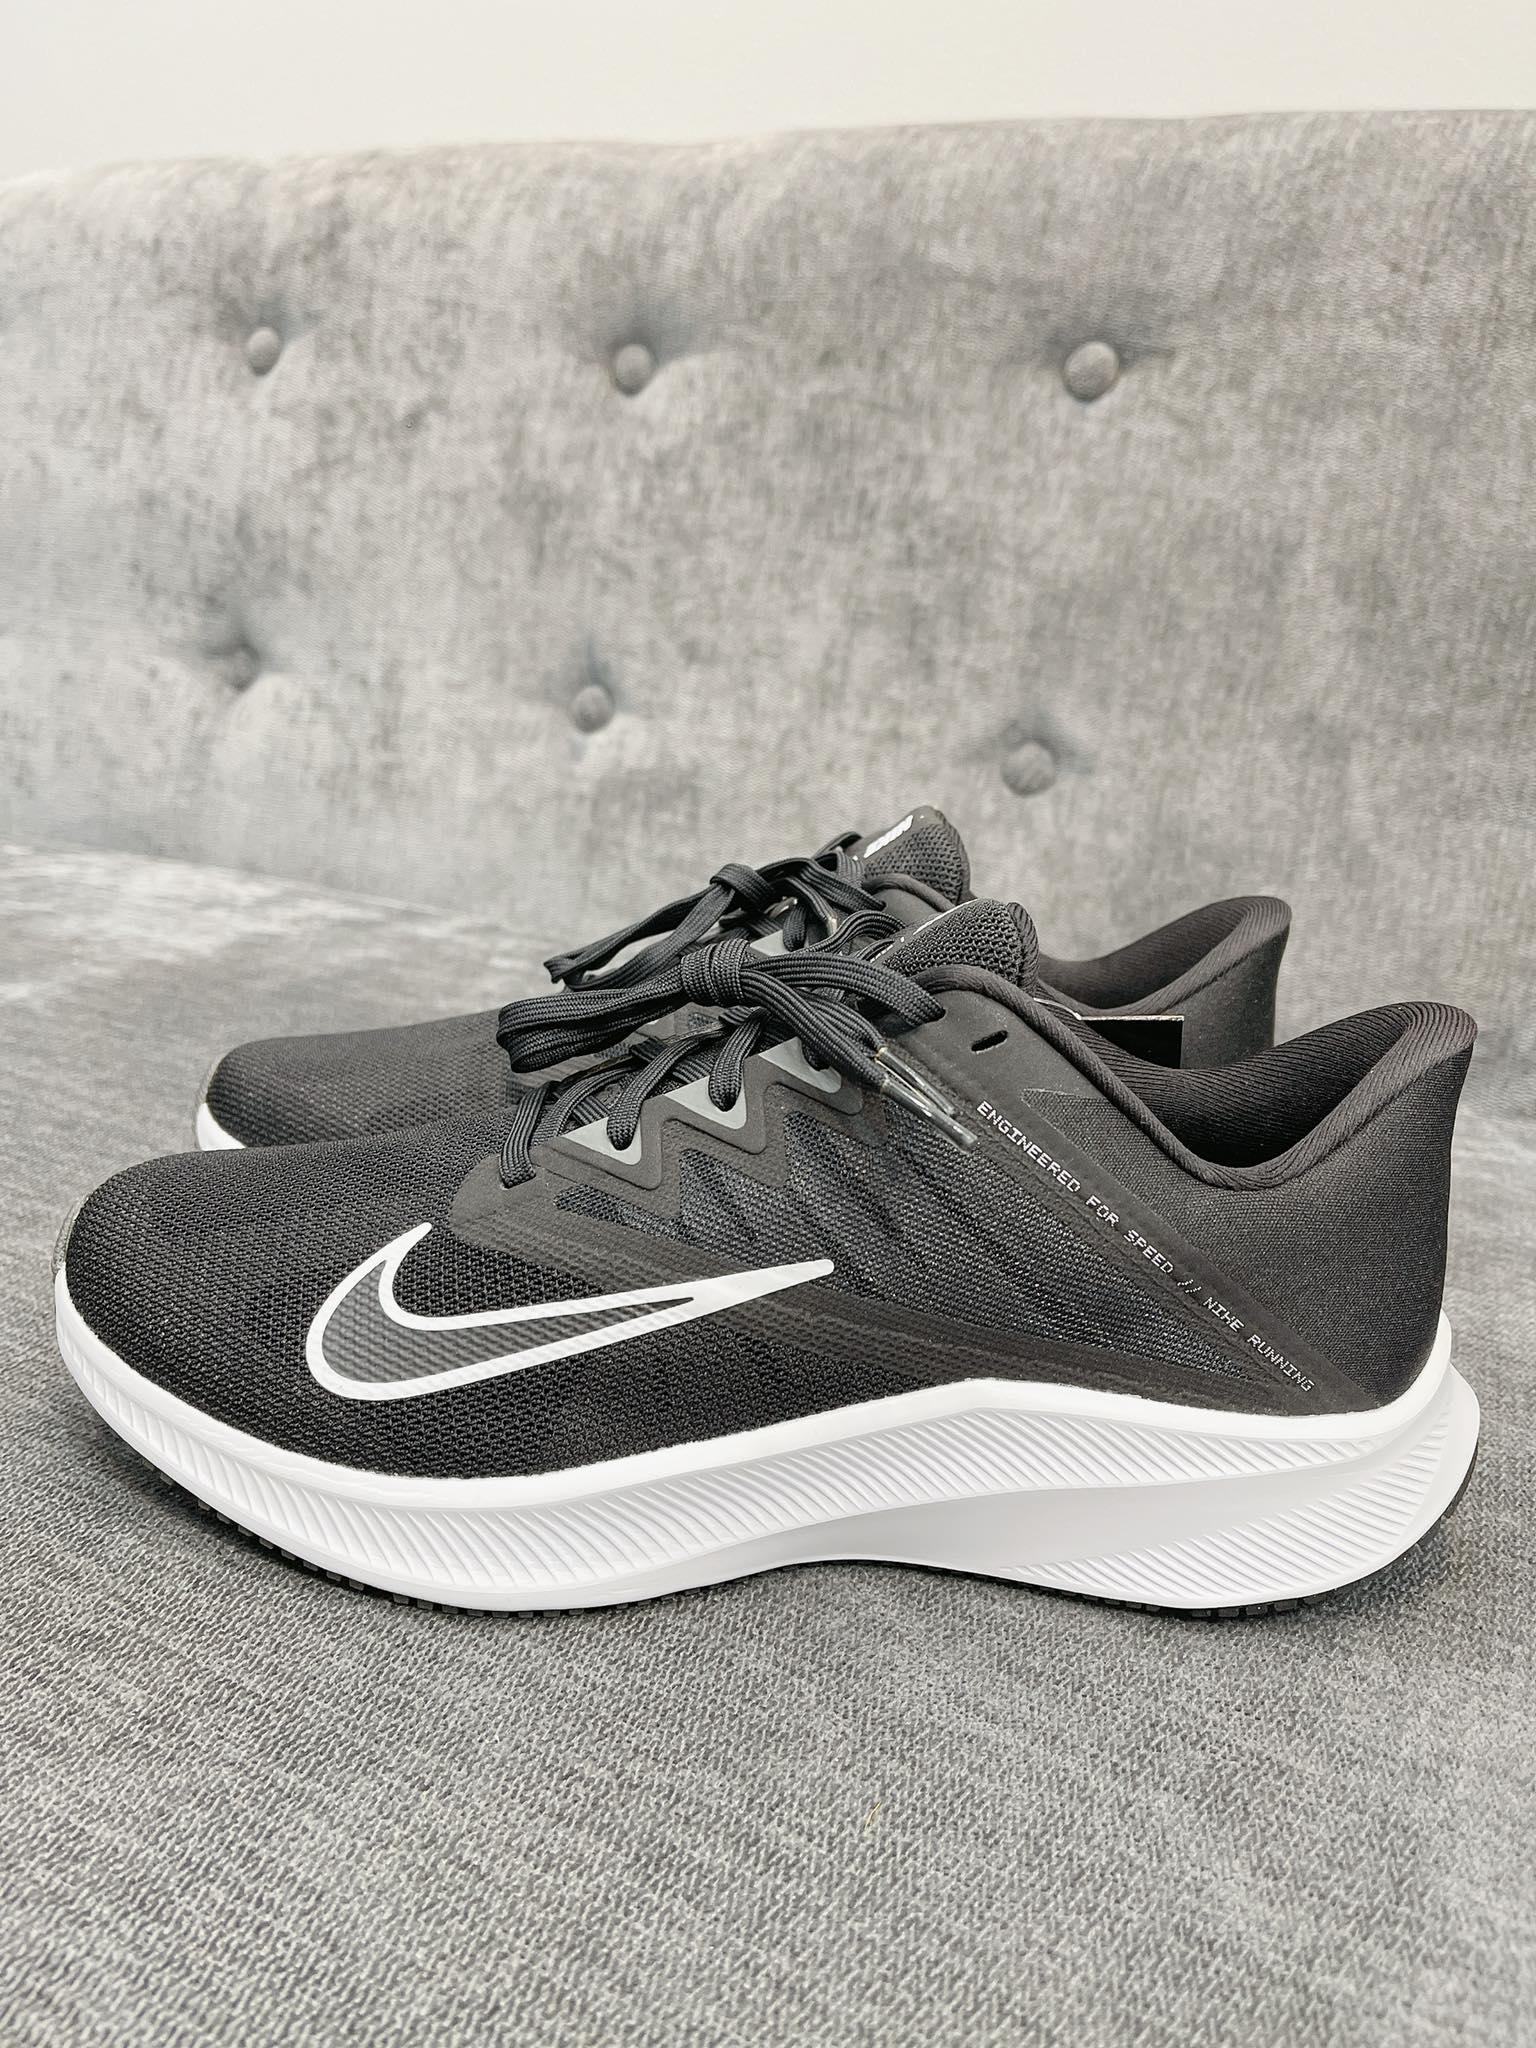  Giày Nike Quest 3